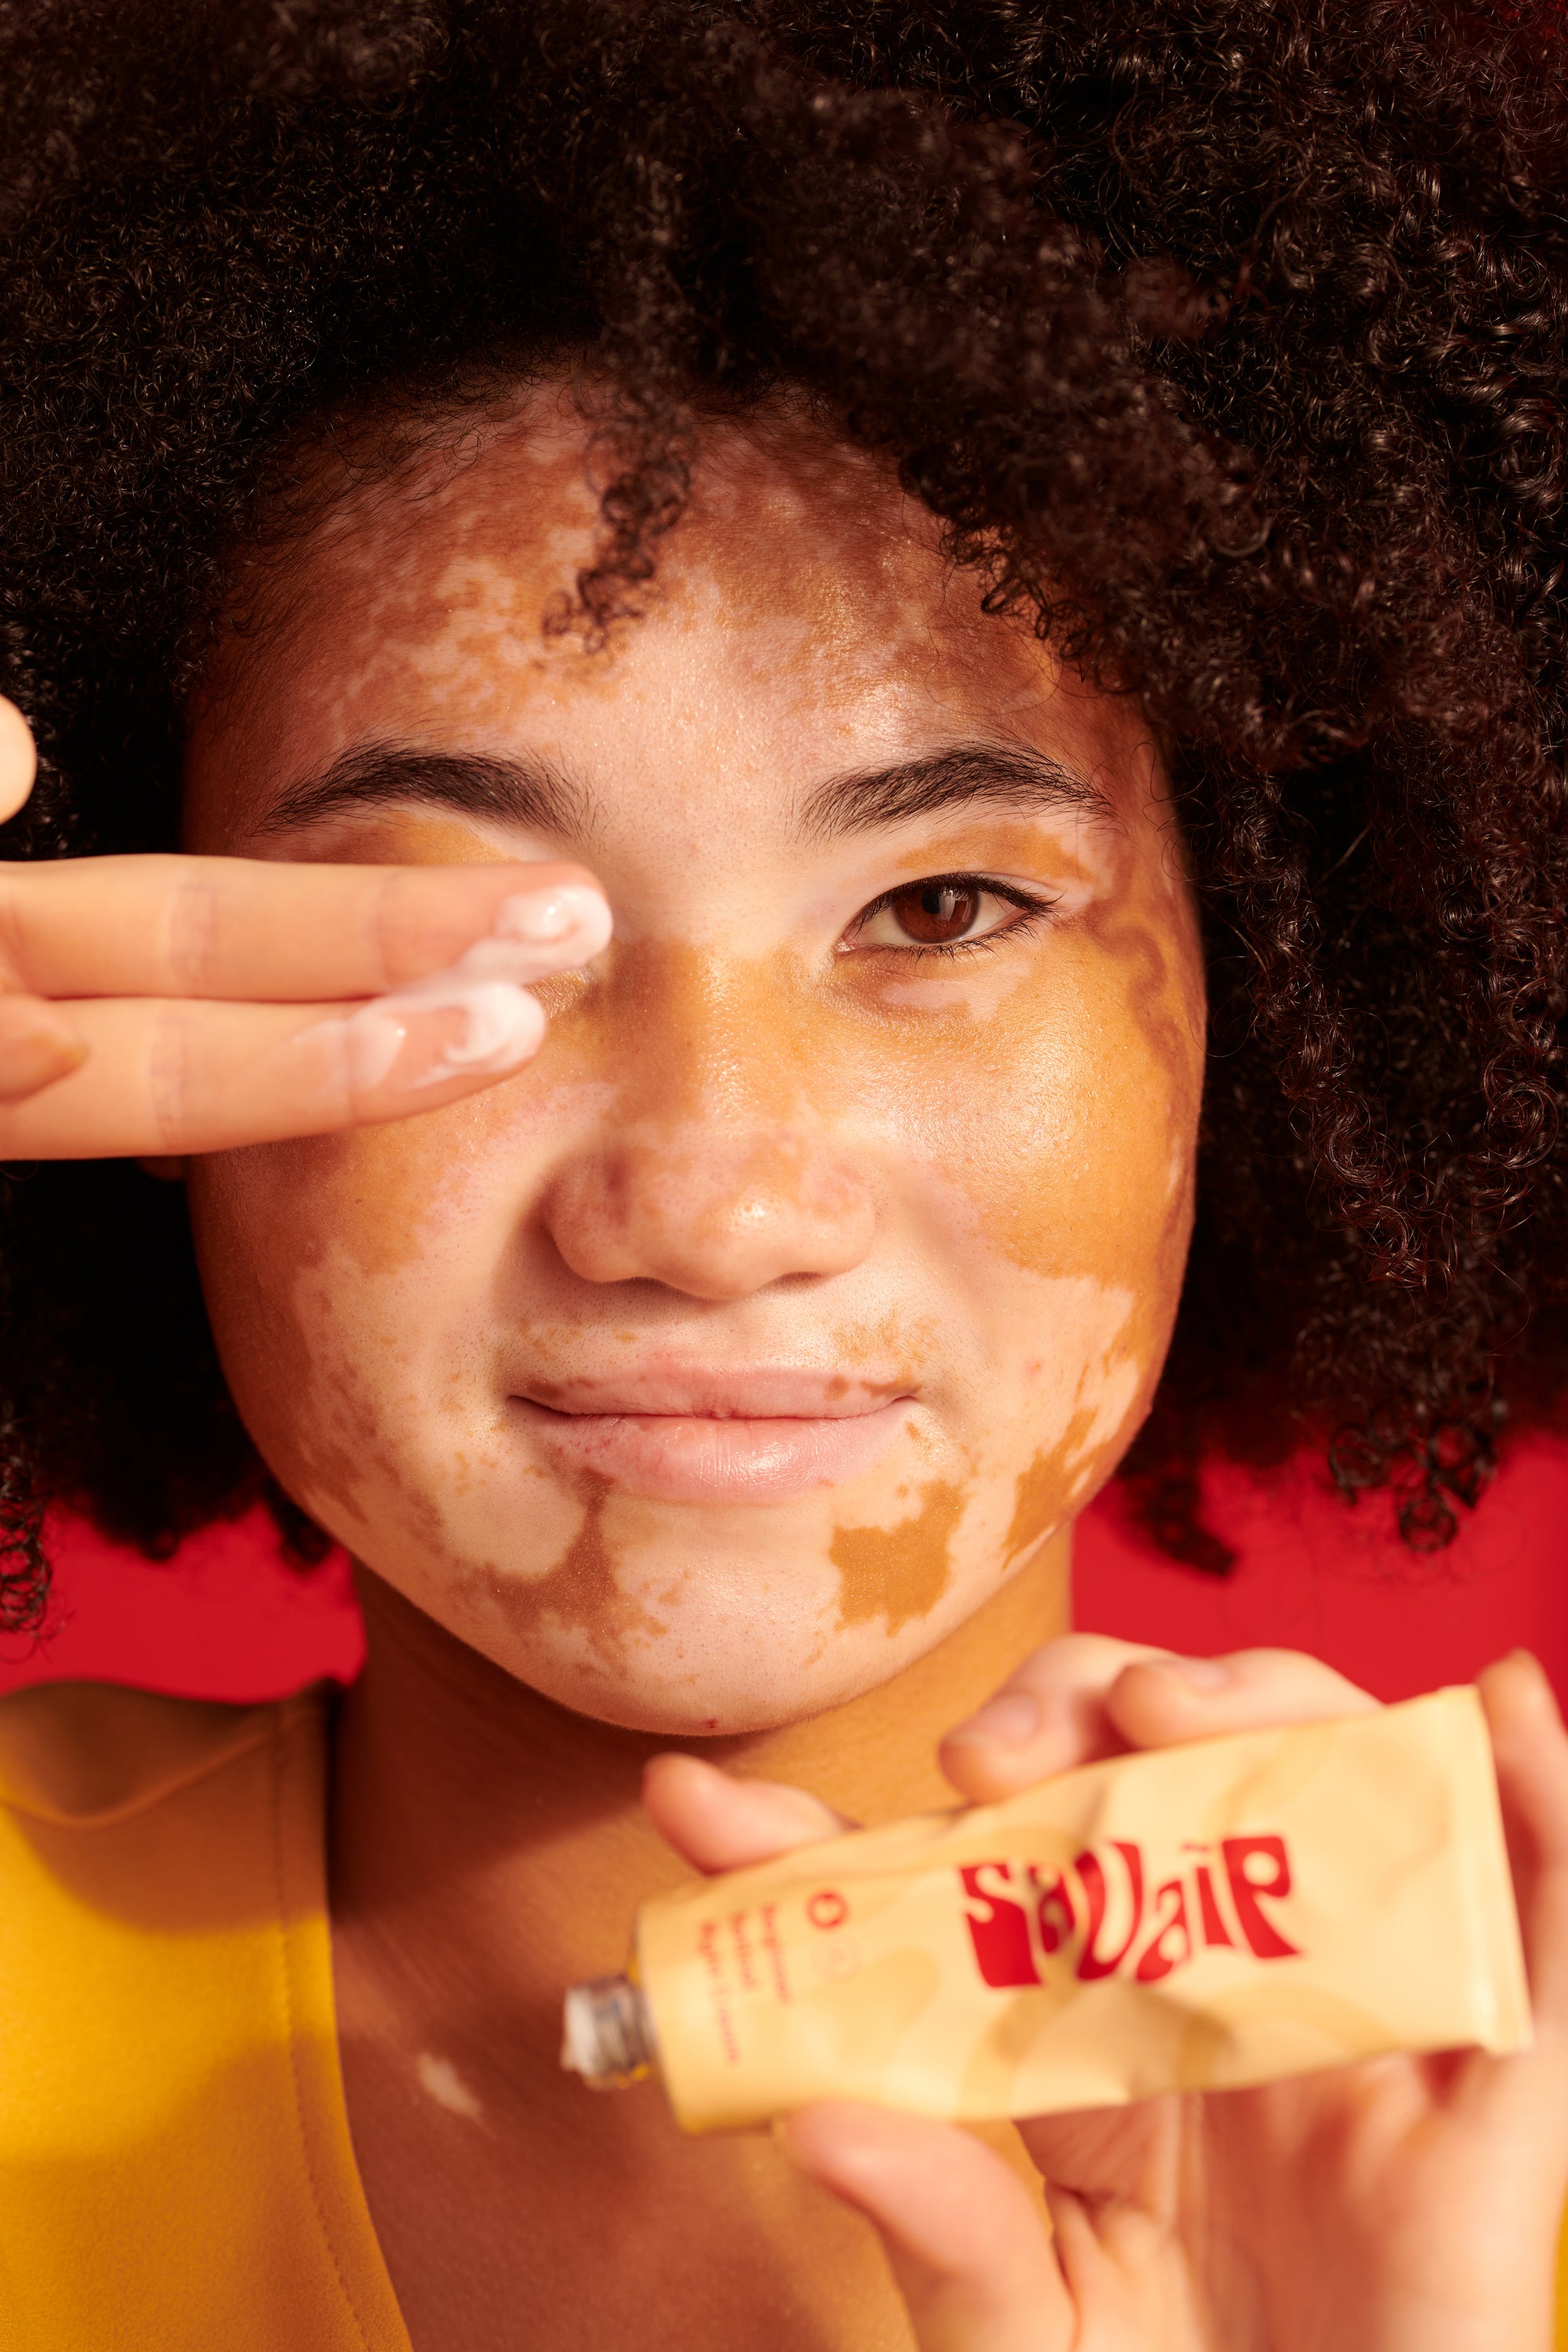 A woman with curly hair applying a product labeled Savaip Beginner Retinol Night cream on her face against a red background.